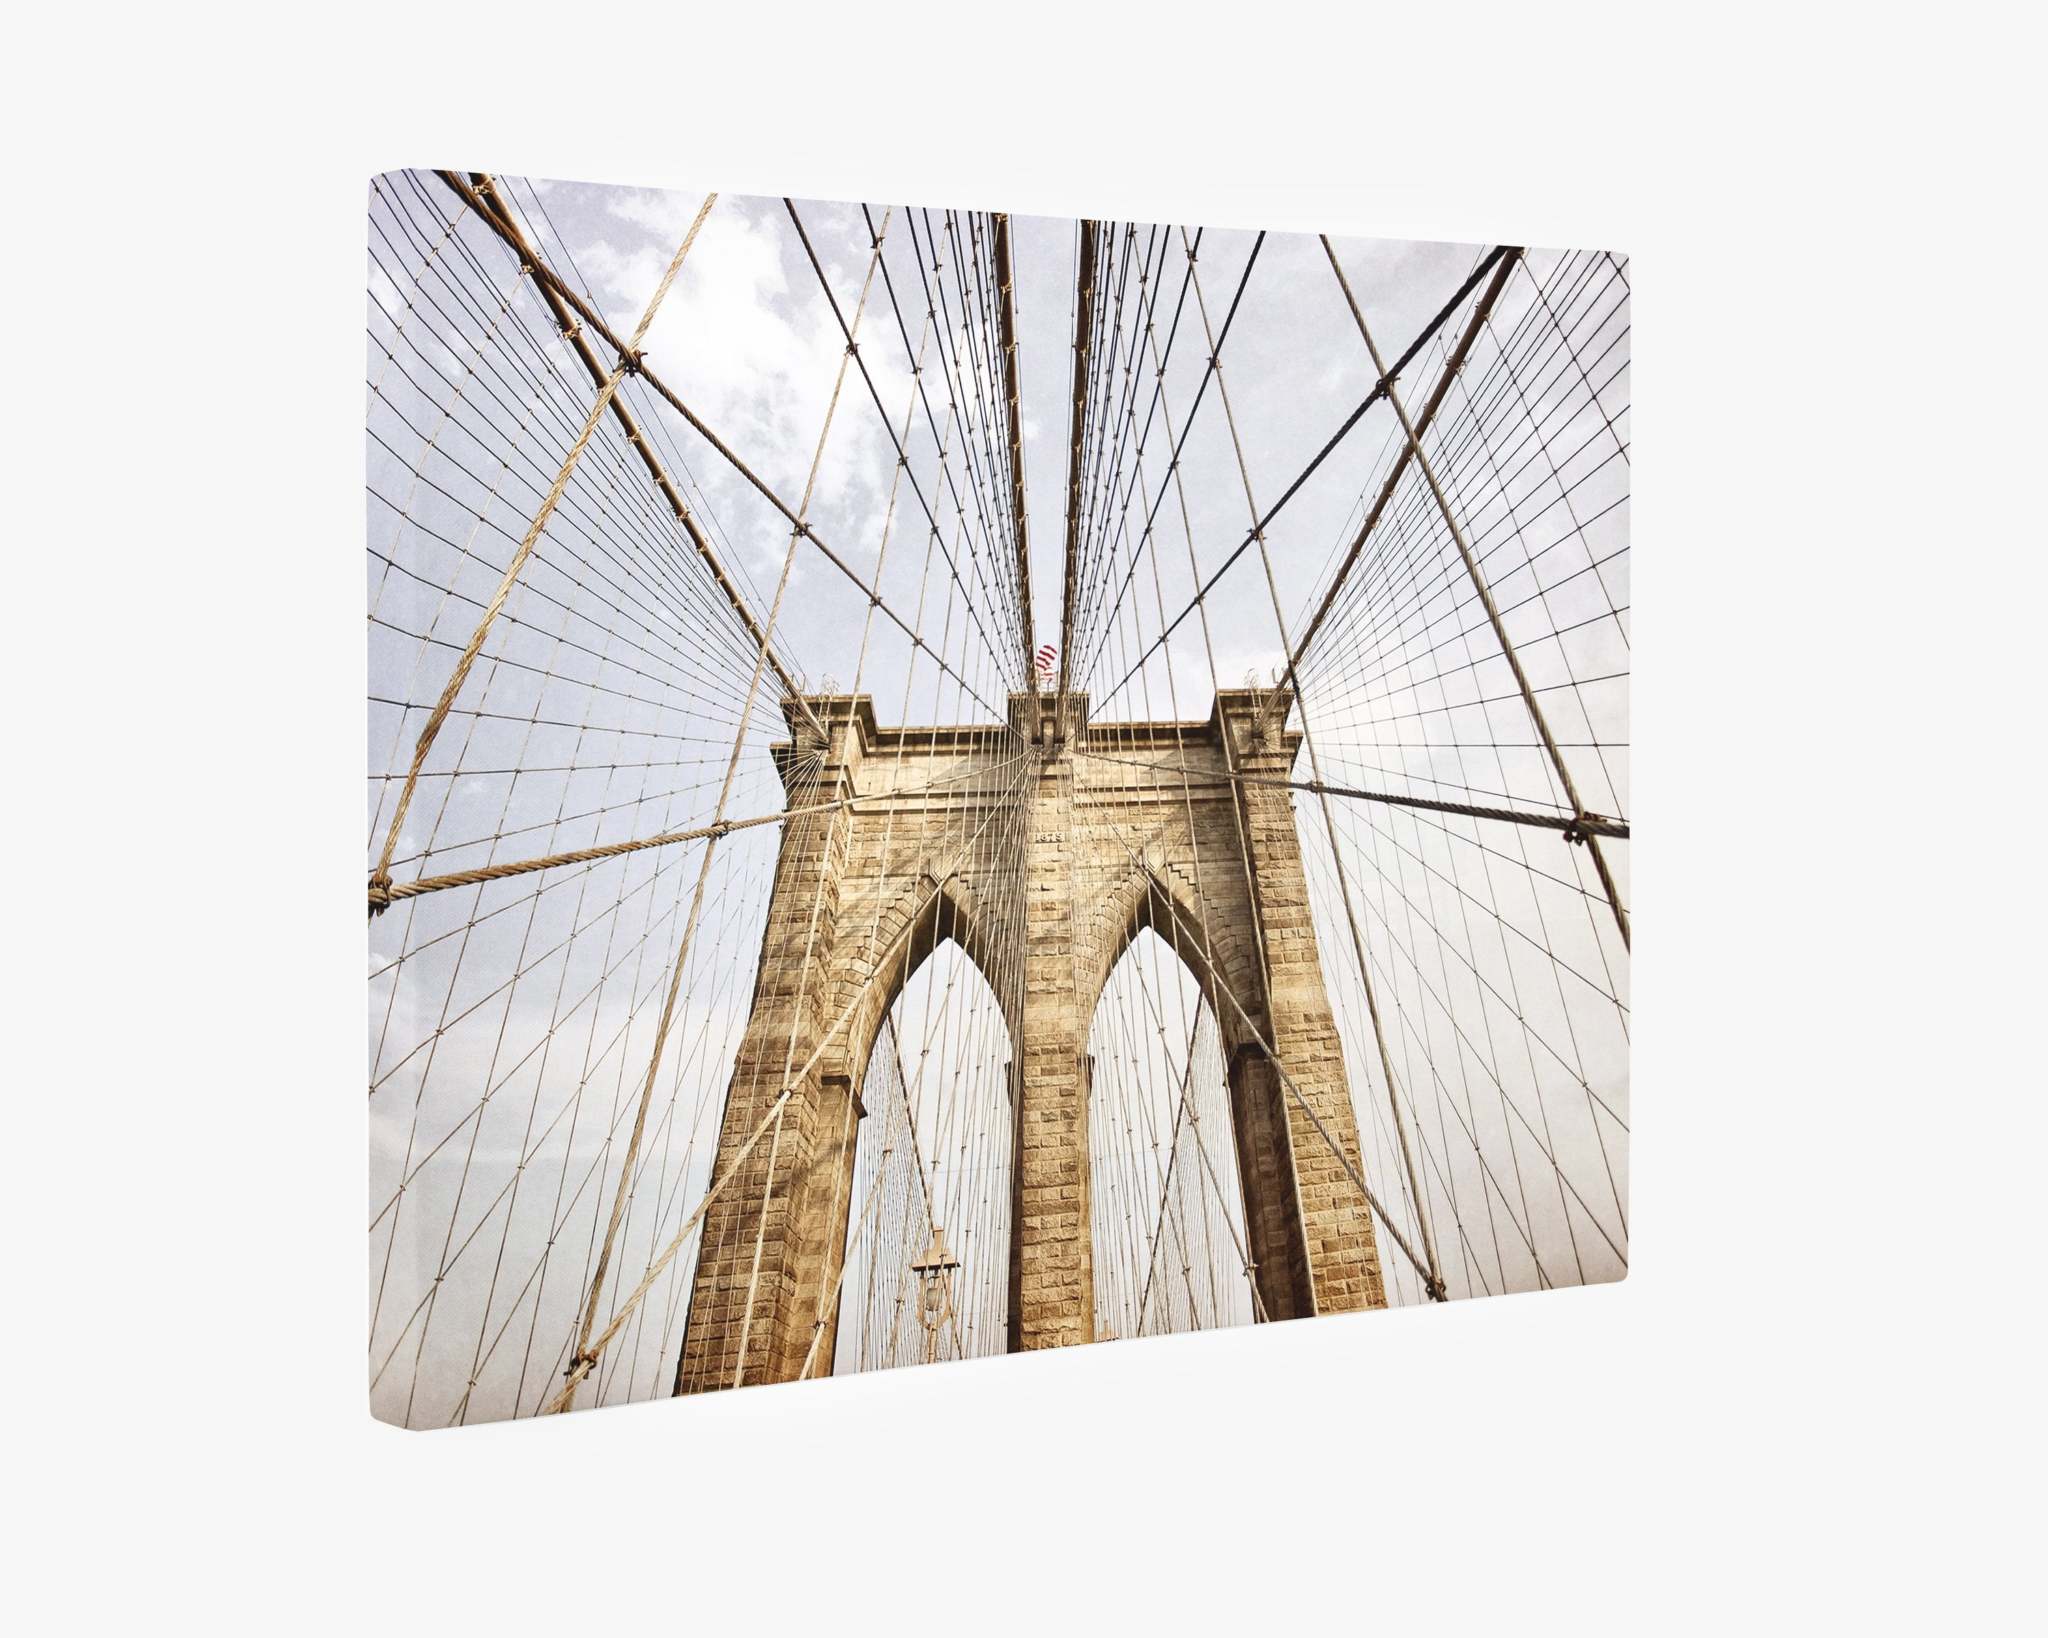 An Offley Green New York City Canvas Wall Art, &#39;Brooklyn Wires,&#39; featuring the iconic view of the Brooklyn Bridge. The image highlights the bridge&#39;s stone towers and intricate web of suspension cables against a cloudy sky backdrop. The perspective is upwards, emphasizing the architectural details and grandeur on premium artist-grade canvas.